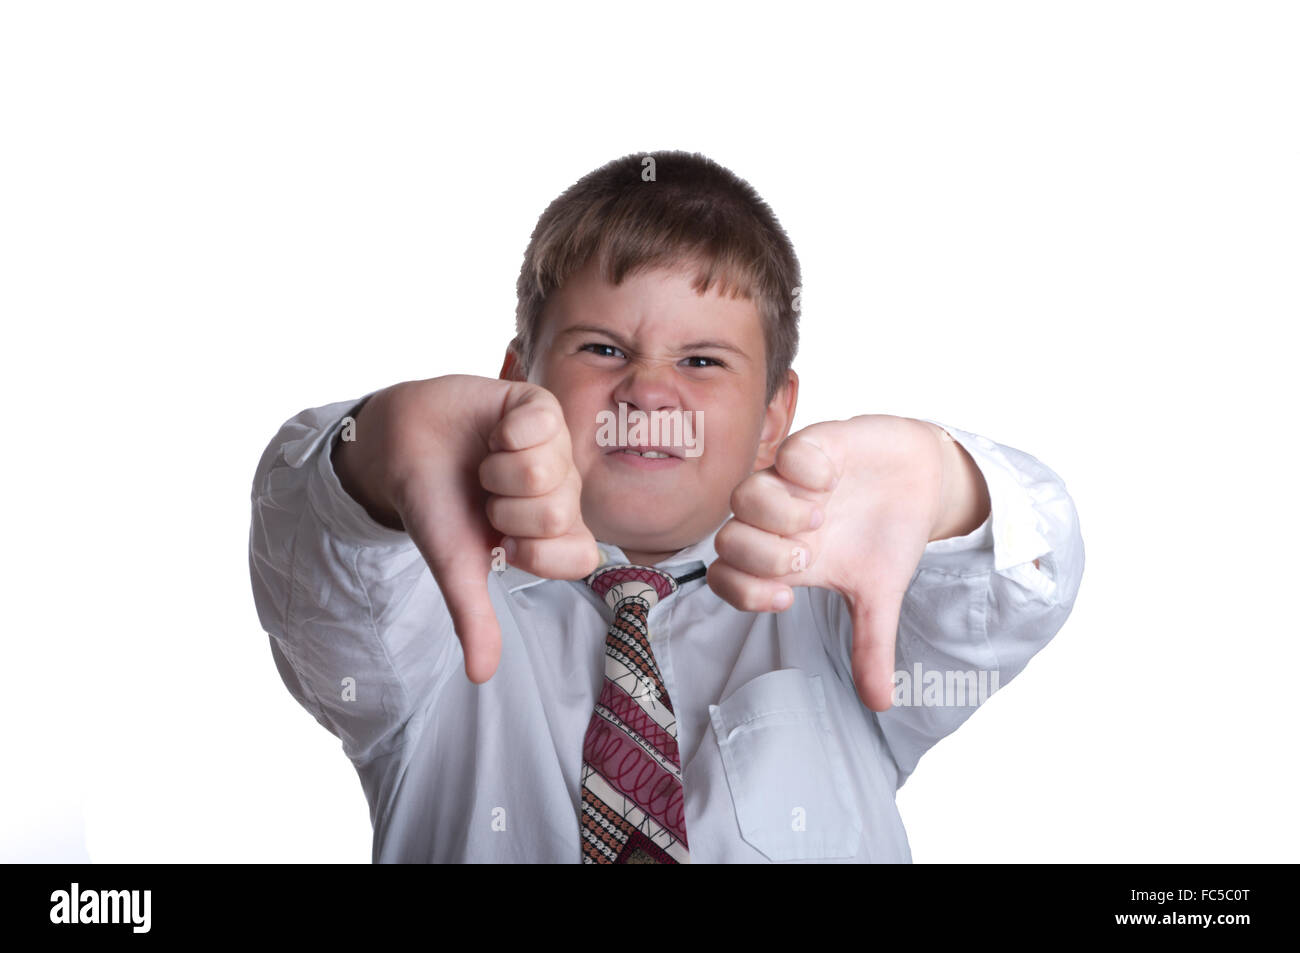 The boy hands shows discontent Stock Photo